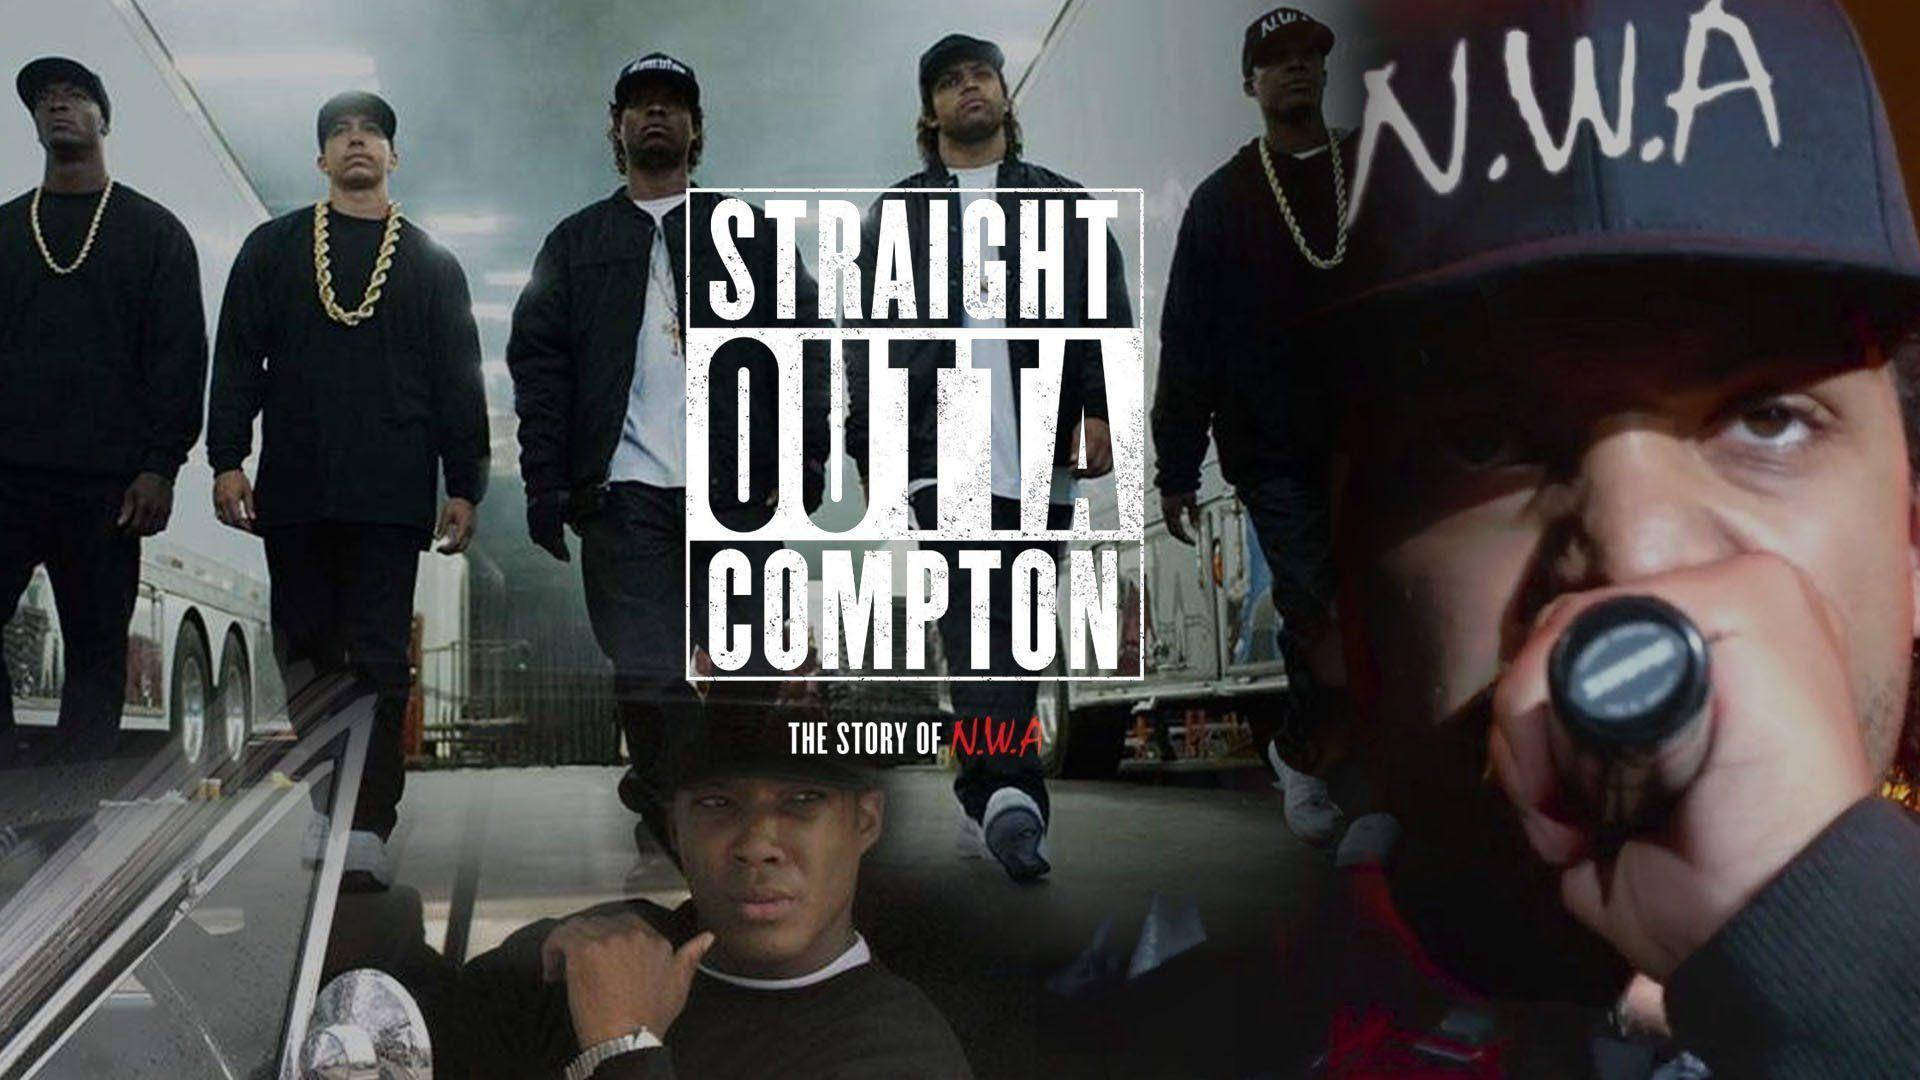 N.W.A. Straight Outta Compton Mix Poster Art Wallpaper